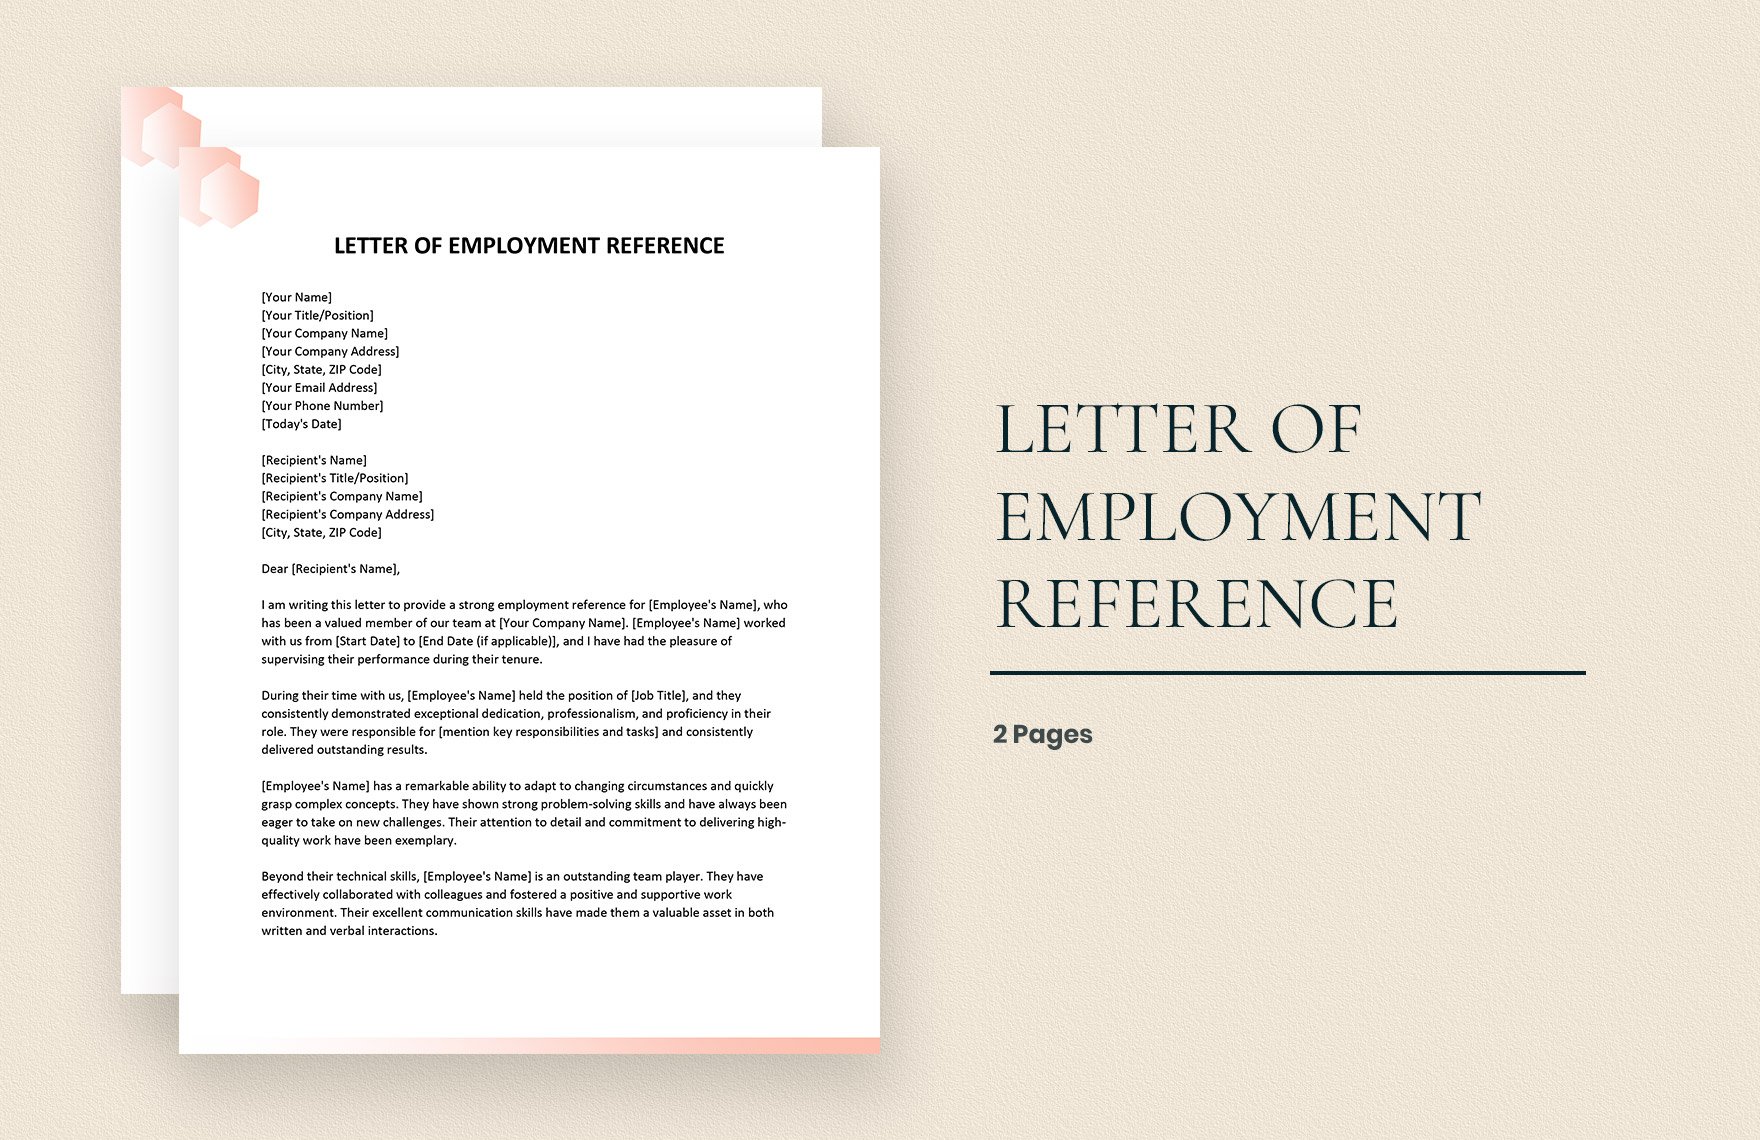 Free Letter of Employment Reference